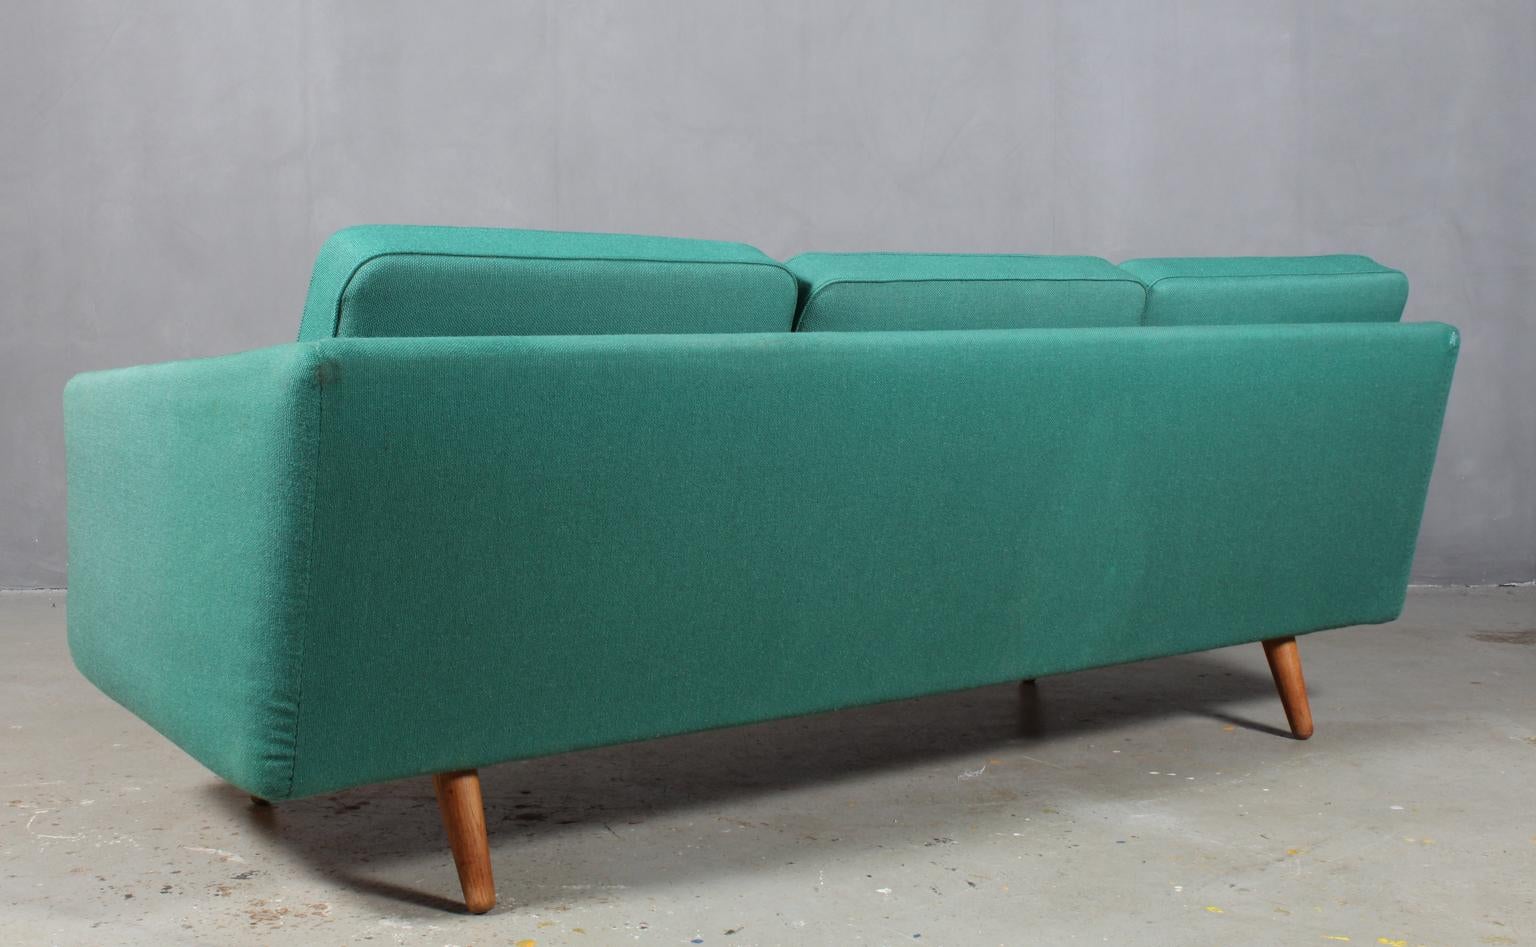 Vintage Børge Mogensen three-seat sofa, original upholstered with Hallingdal wool by Kvadrat, which was designed by Nanna Ditzel.

Legs of oak.

Model 201, made by Fredericia Furniture.

This is the old model 201 which was the first sofa that